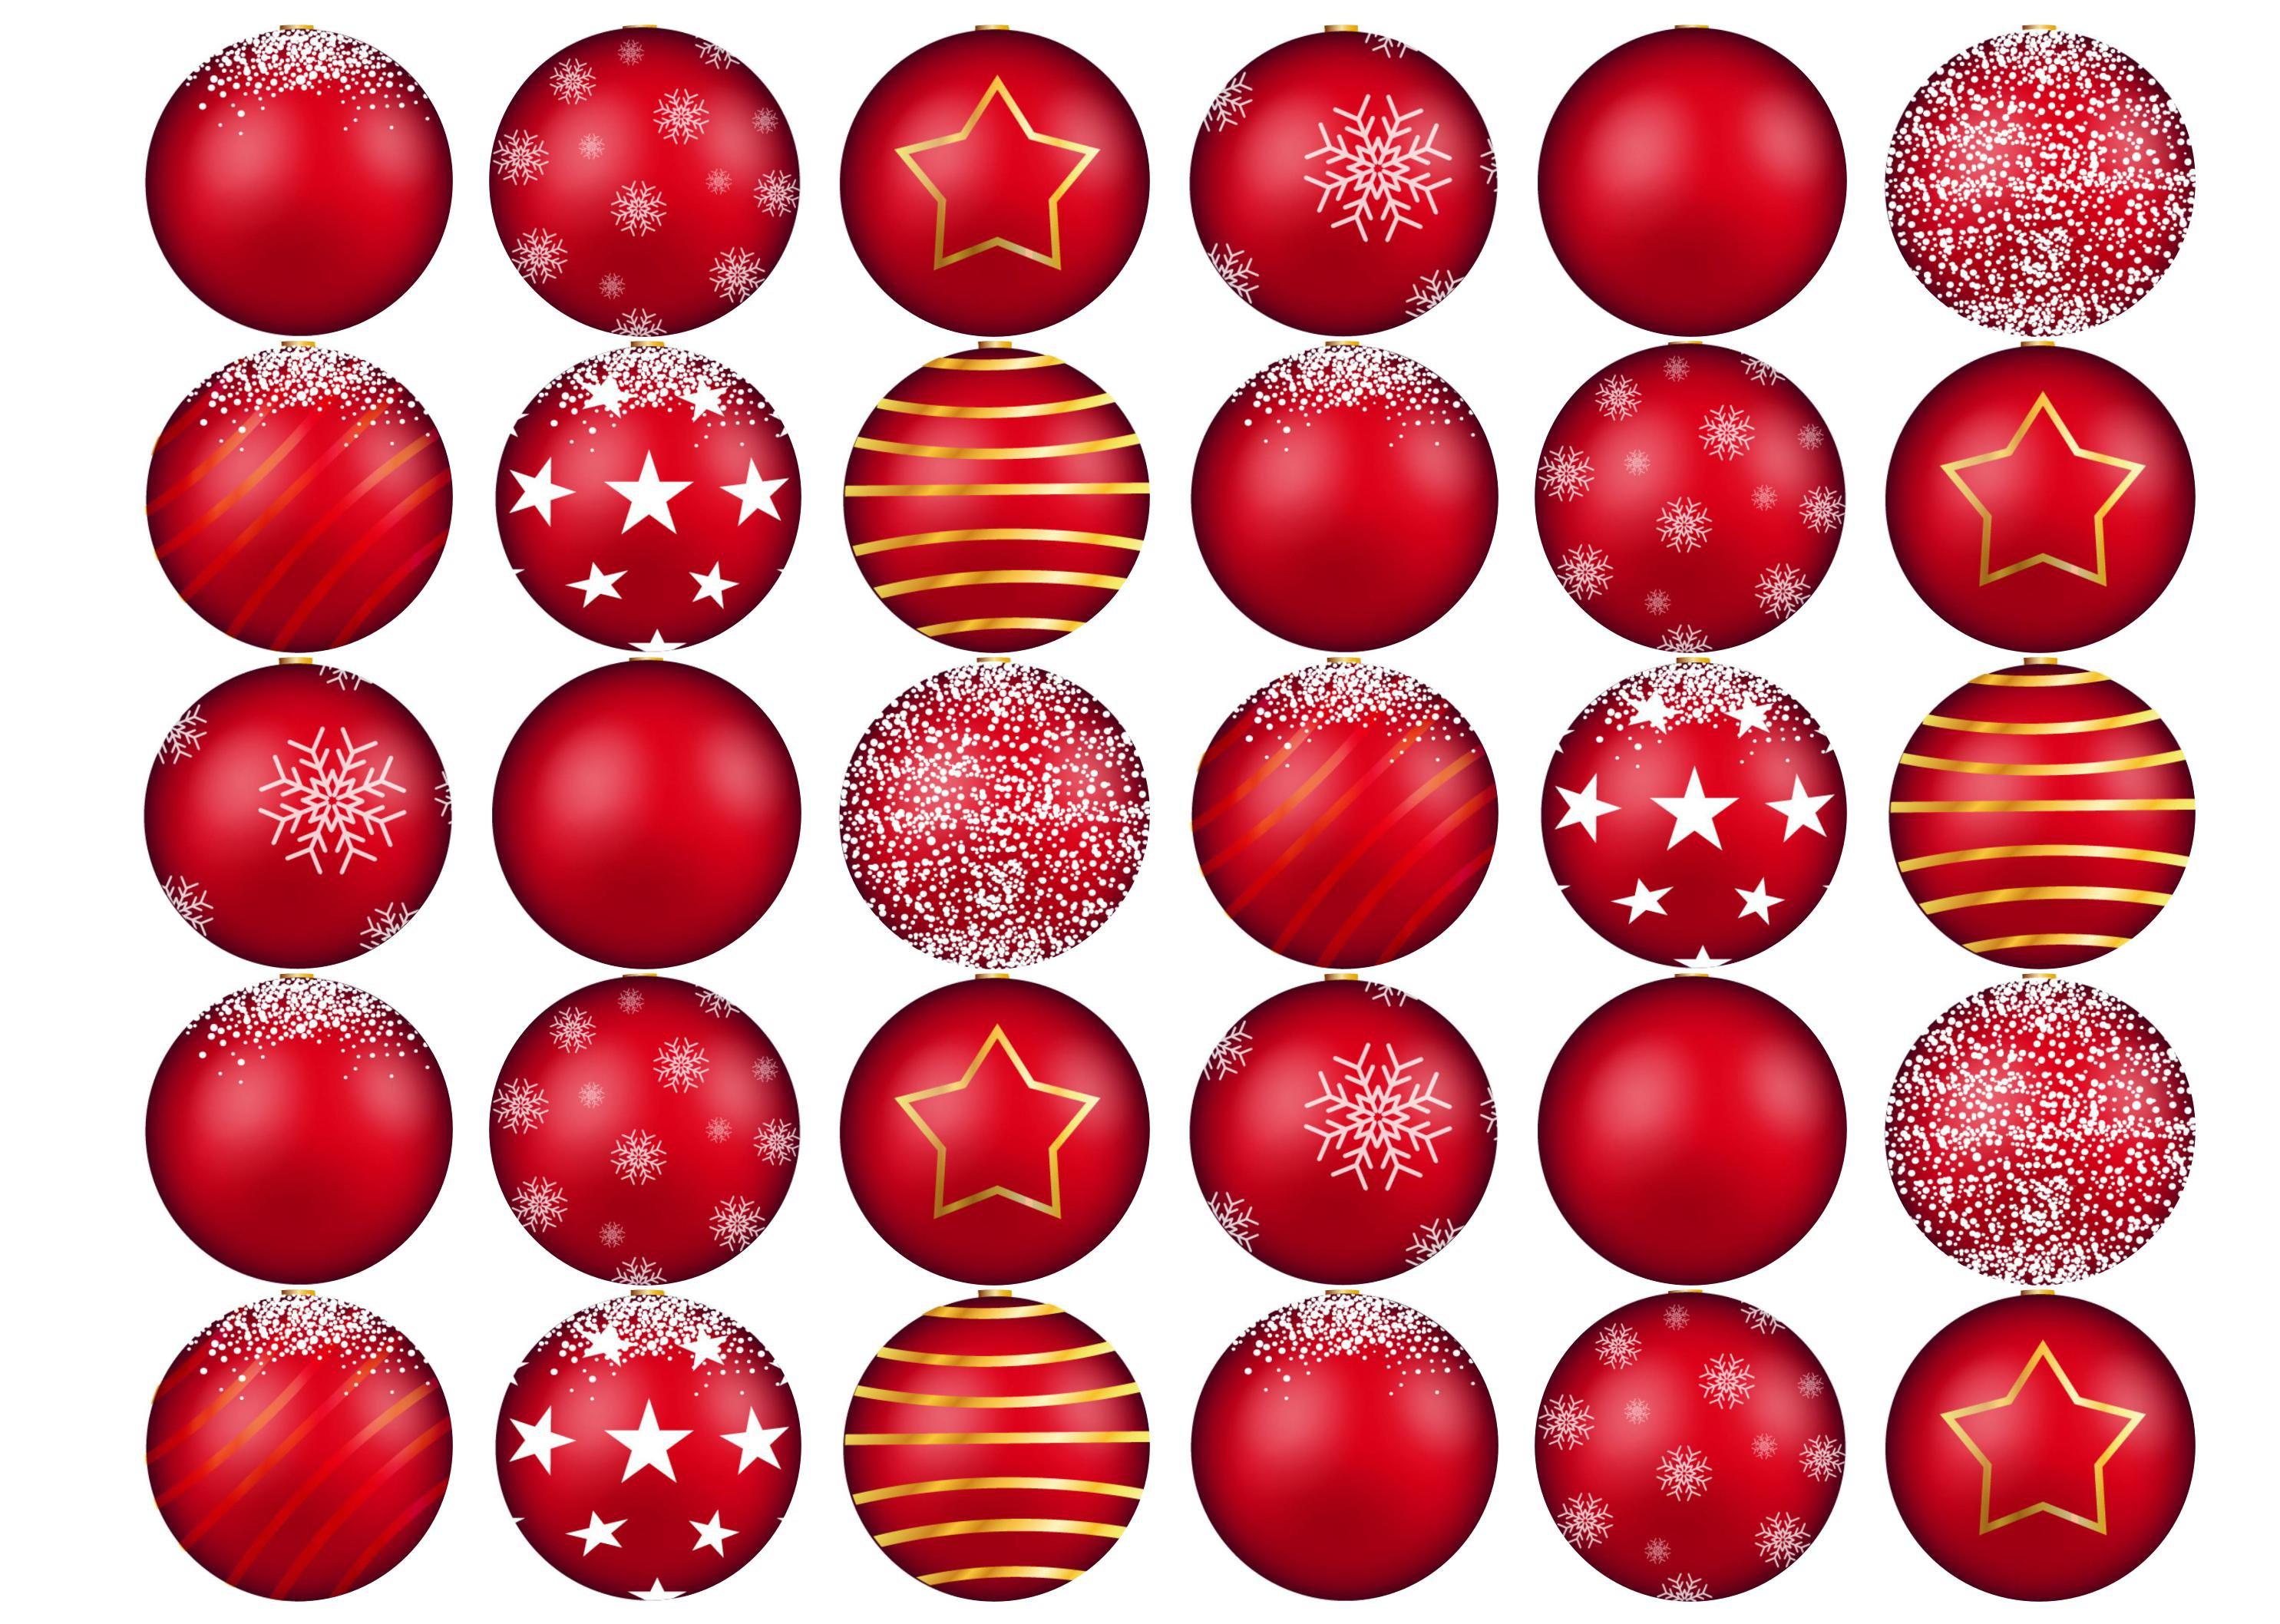 30 edible printed cupcake toppers with red Christmas Bauble designs